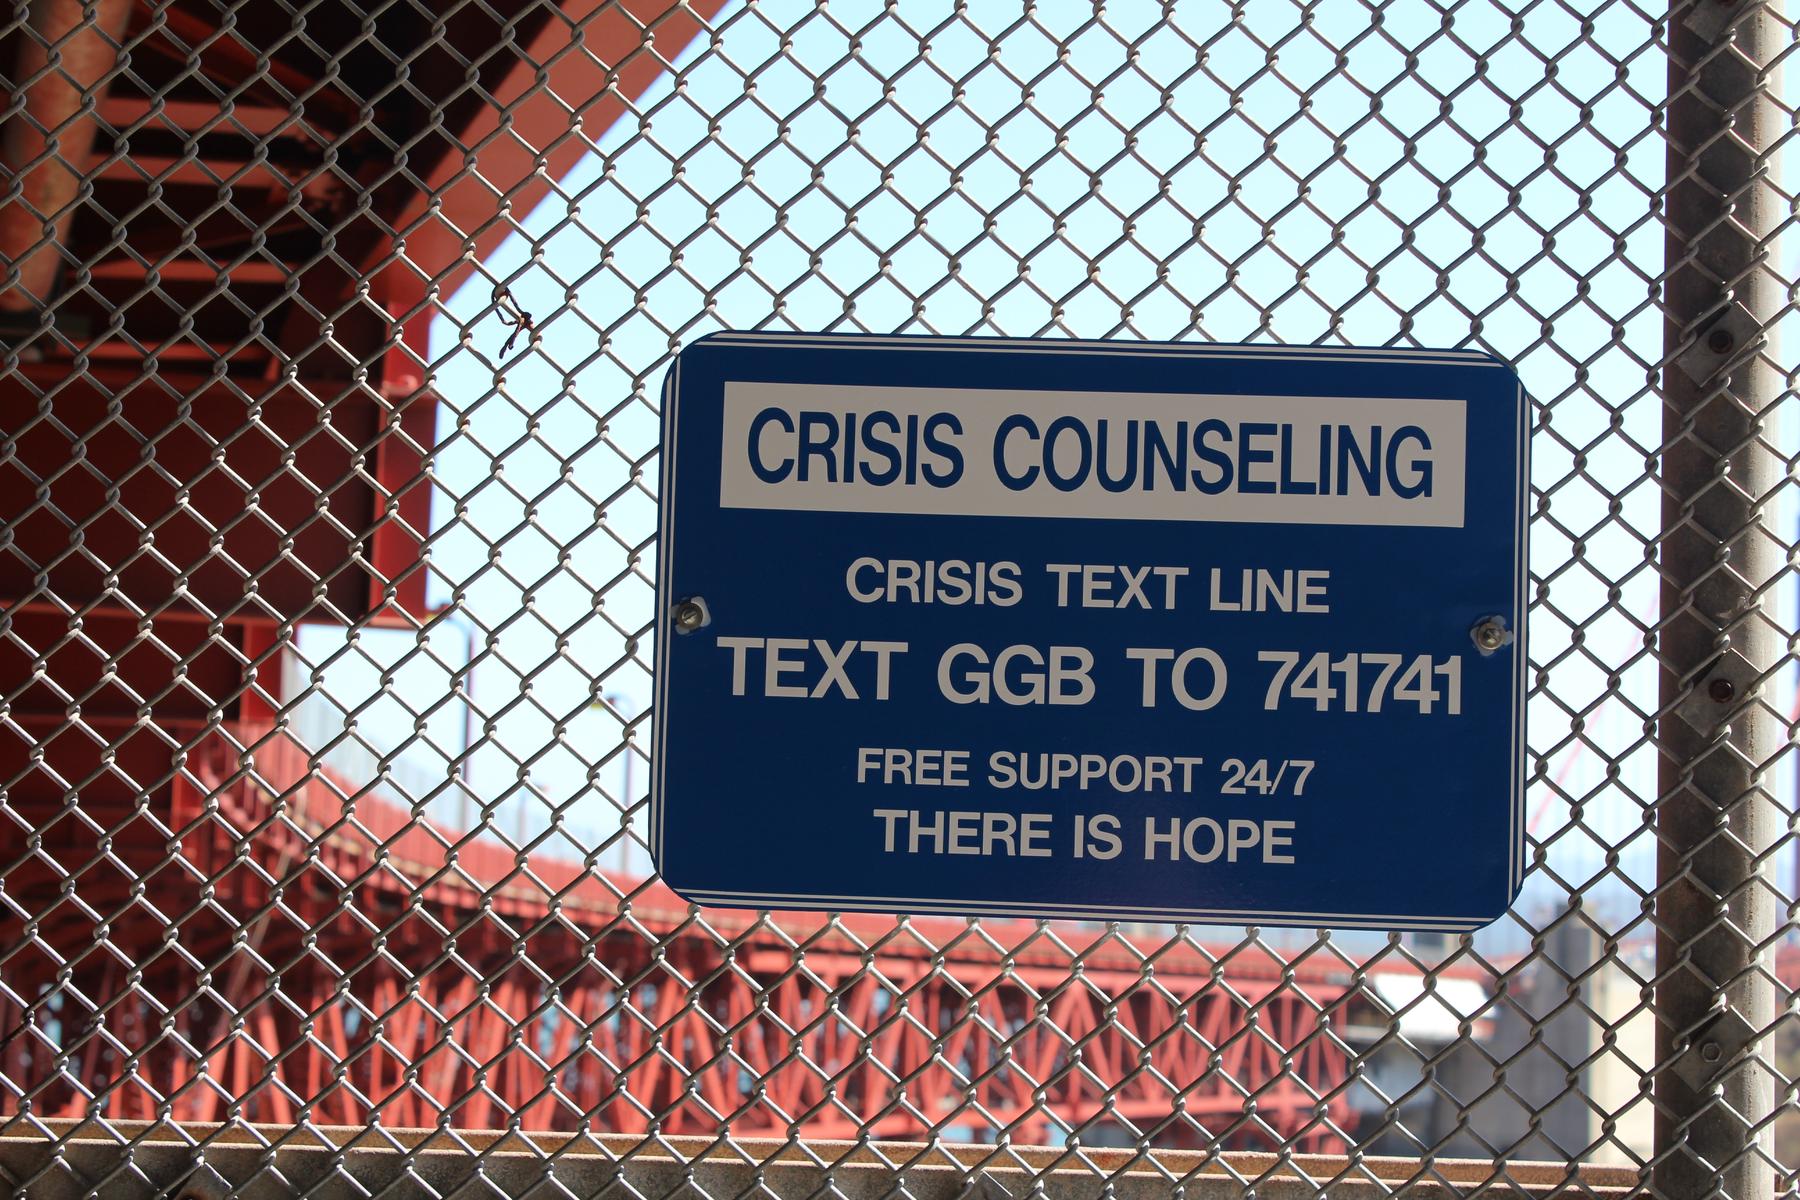 File:Crisis Counseling at Golden Gate Bridge.jpg - a person sleeping on a bed with a blanket